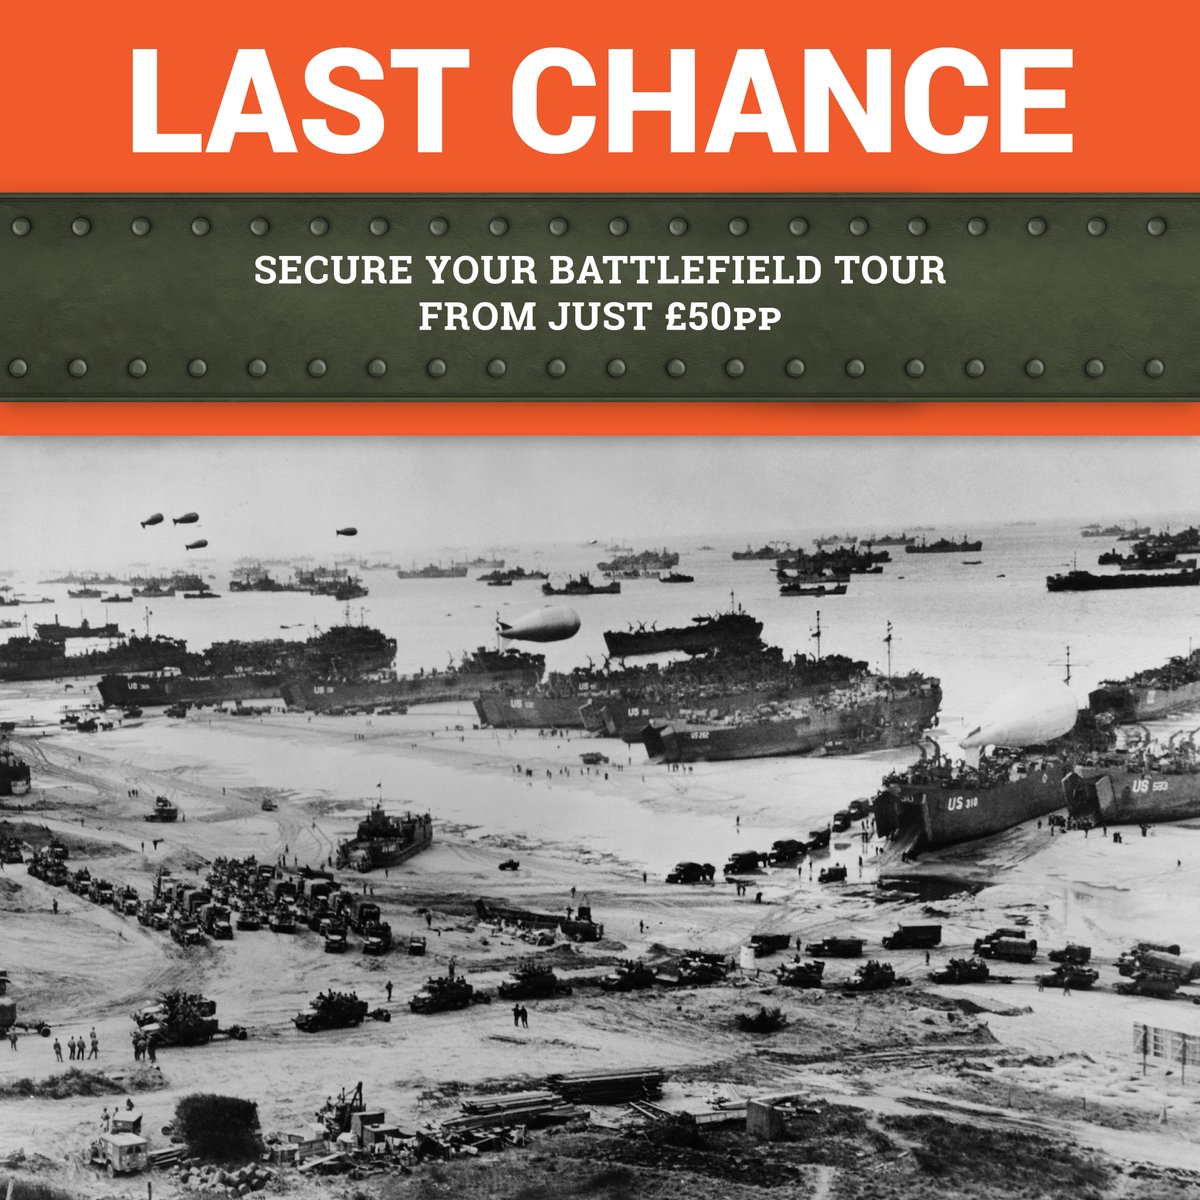 With low deposits from only £50pp ending in just ONE week, now is the time to start planning your journey of discovery to the battlefields. Secure your place today with just a deposit, then spread the remaining cost with our flexible payment options >> ow.ly/lbbM50QGe9S